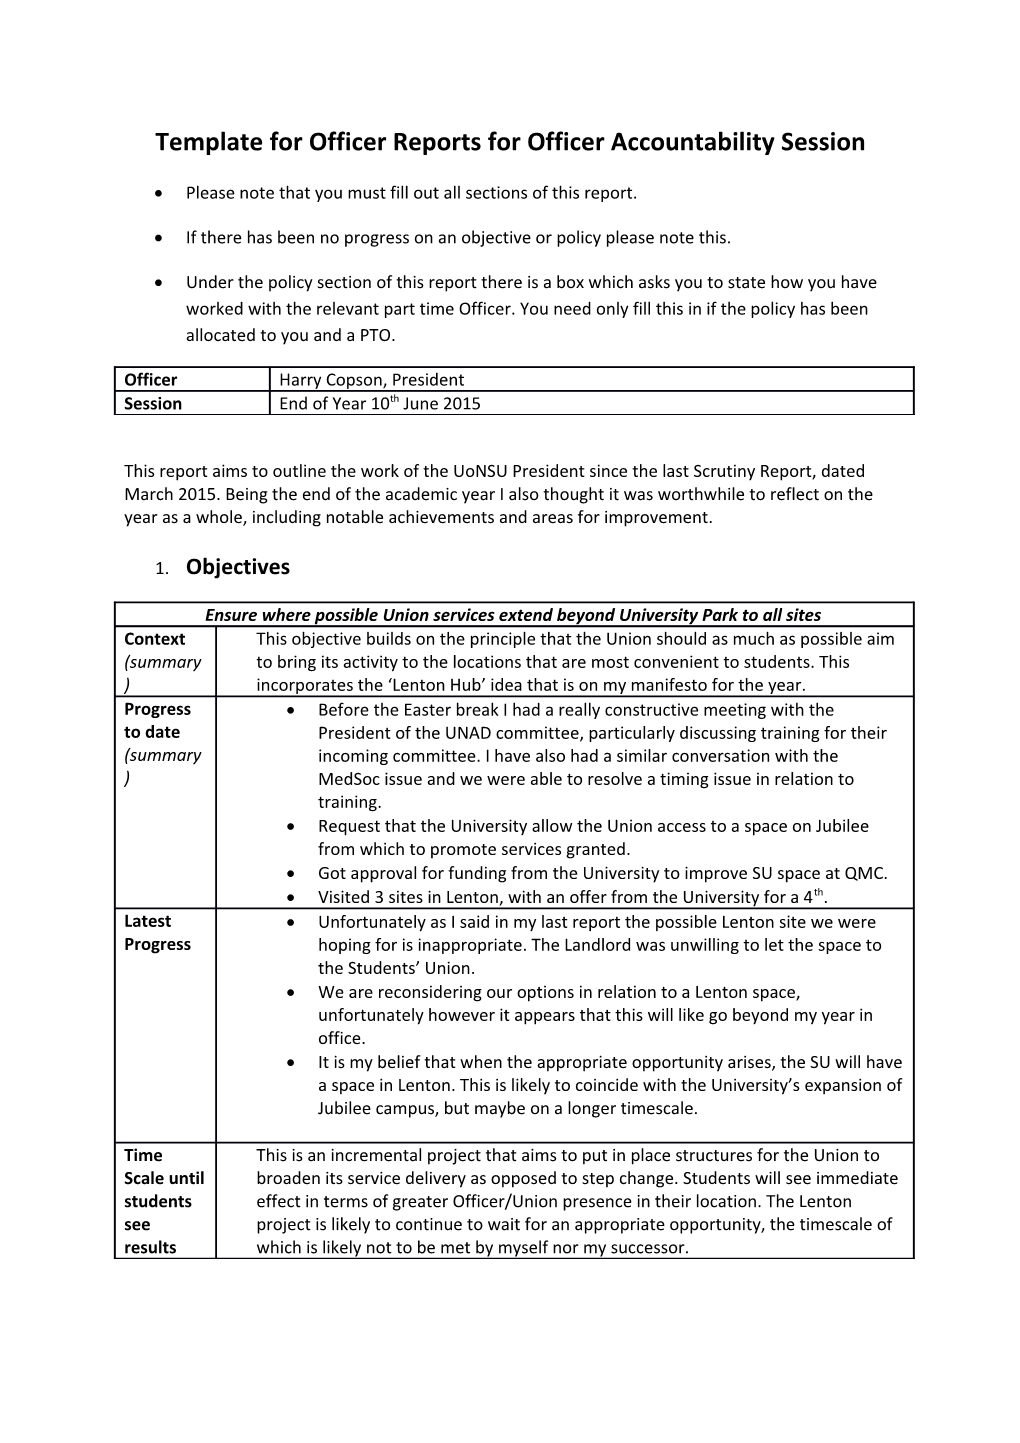 Template for Officer Reports for Officer Accountability Session